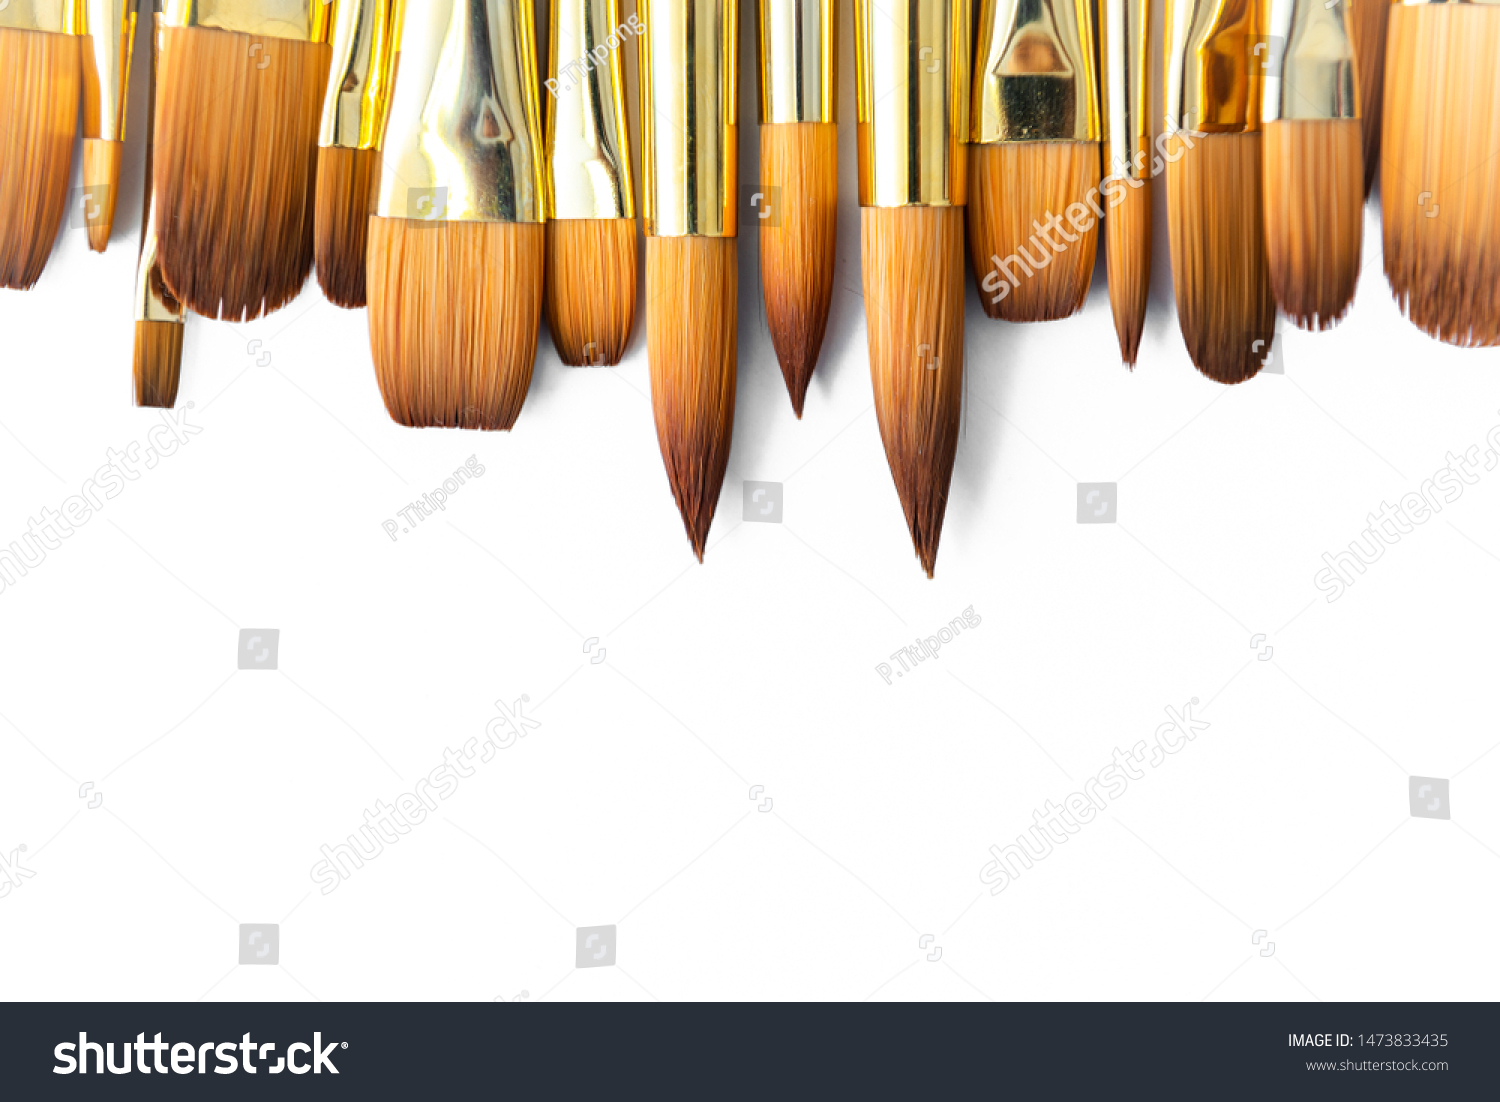 row of artist paint brushes closeup on white background, paintbrushes for wallpaper. #1473833435